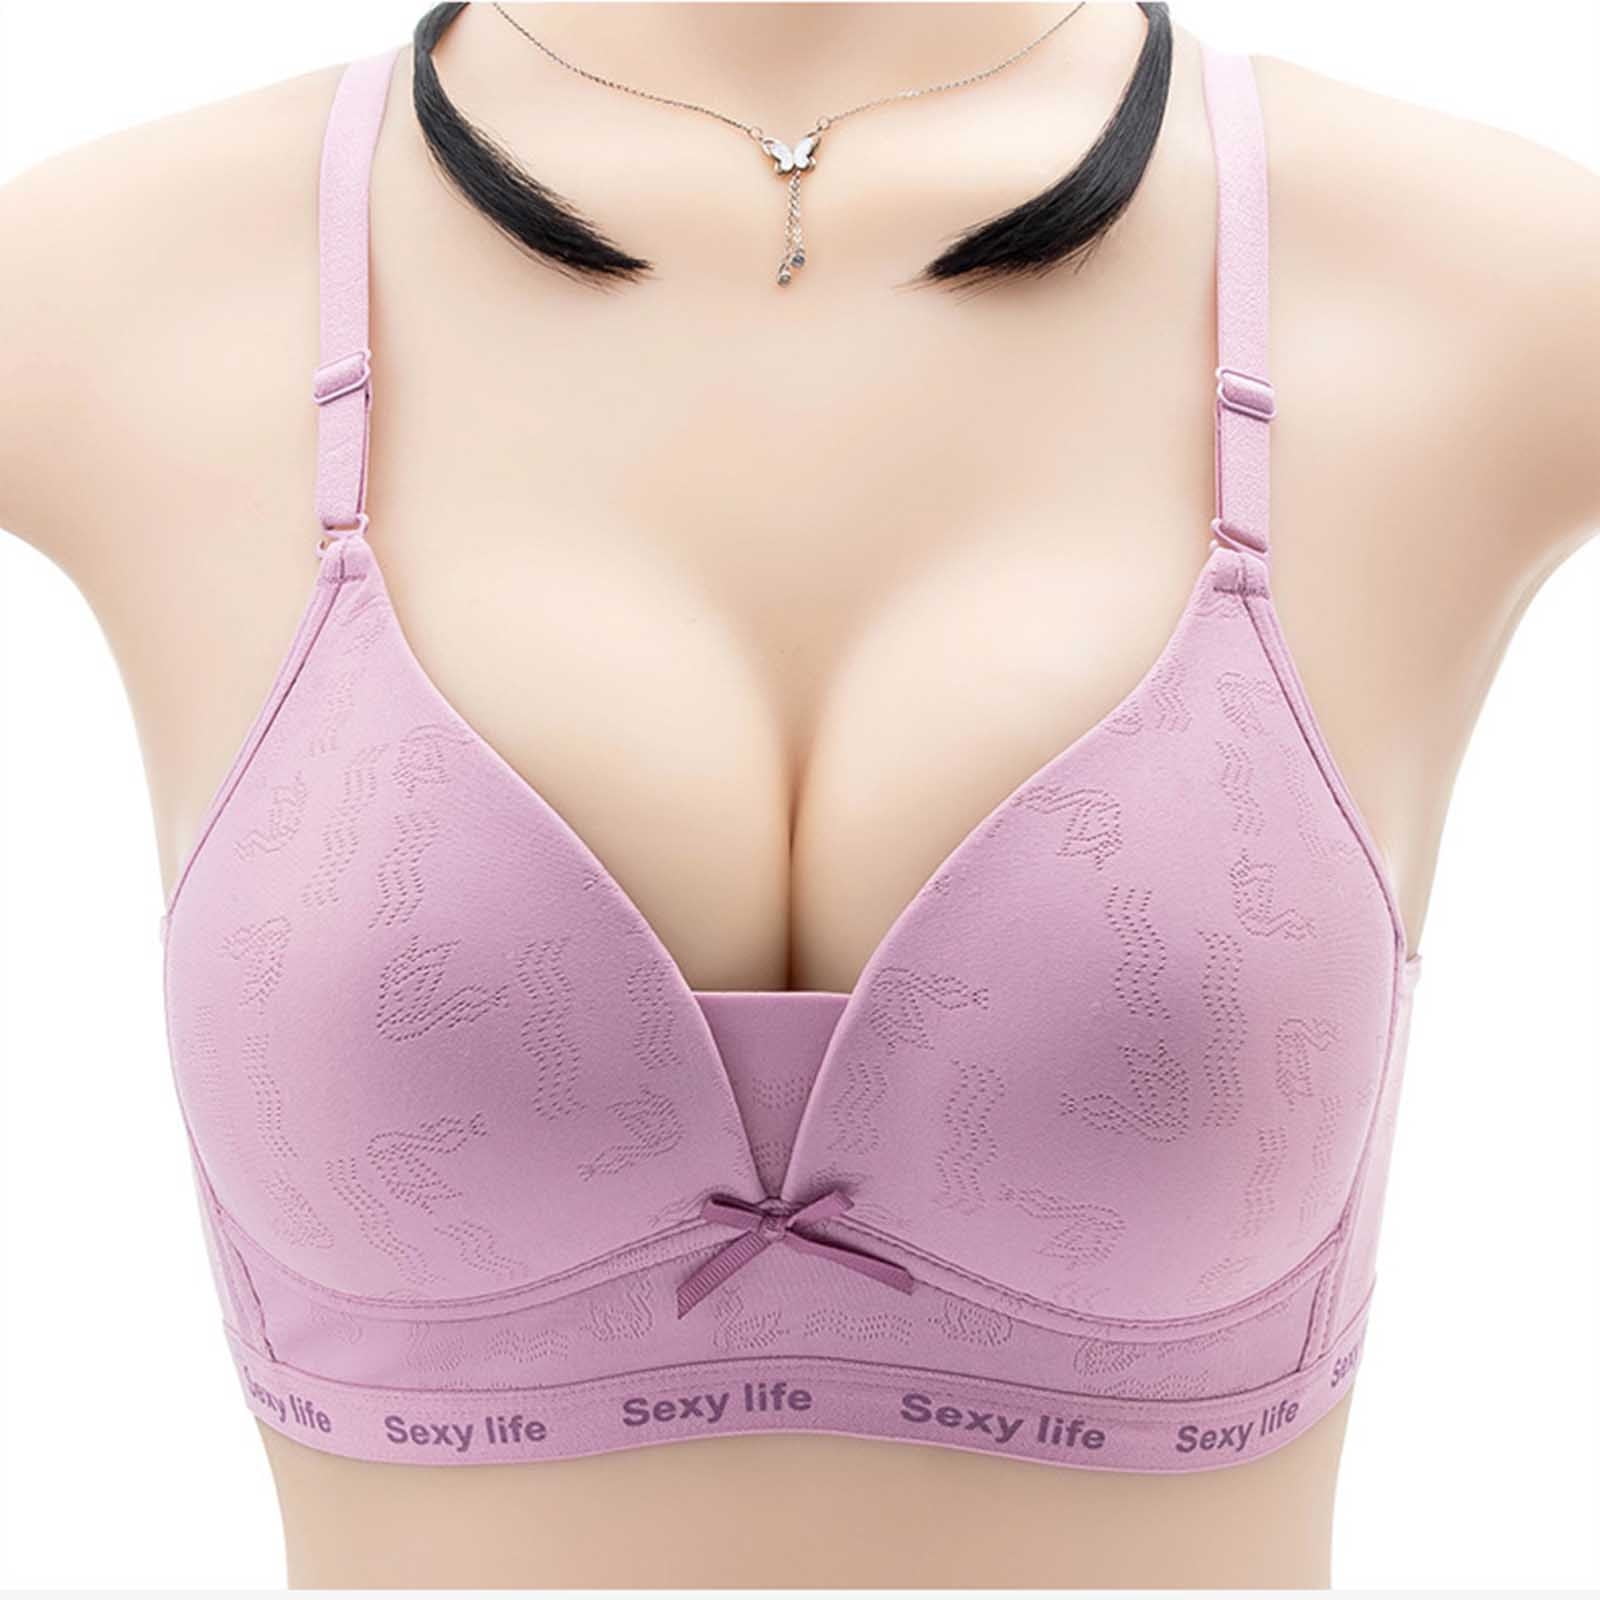 Bigersell Cotton Bras for Women Wirefree Clearance Padded Push up Bras for  Women Balconette Bra Style B299 V-Neck Seamless Bras Hook and Eye Bra